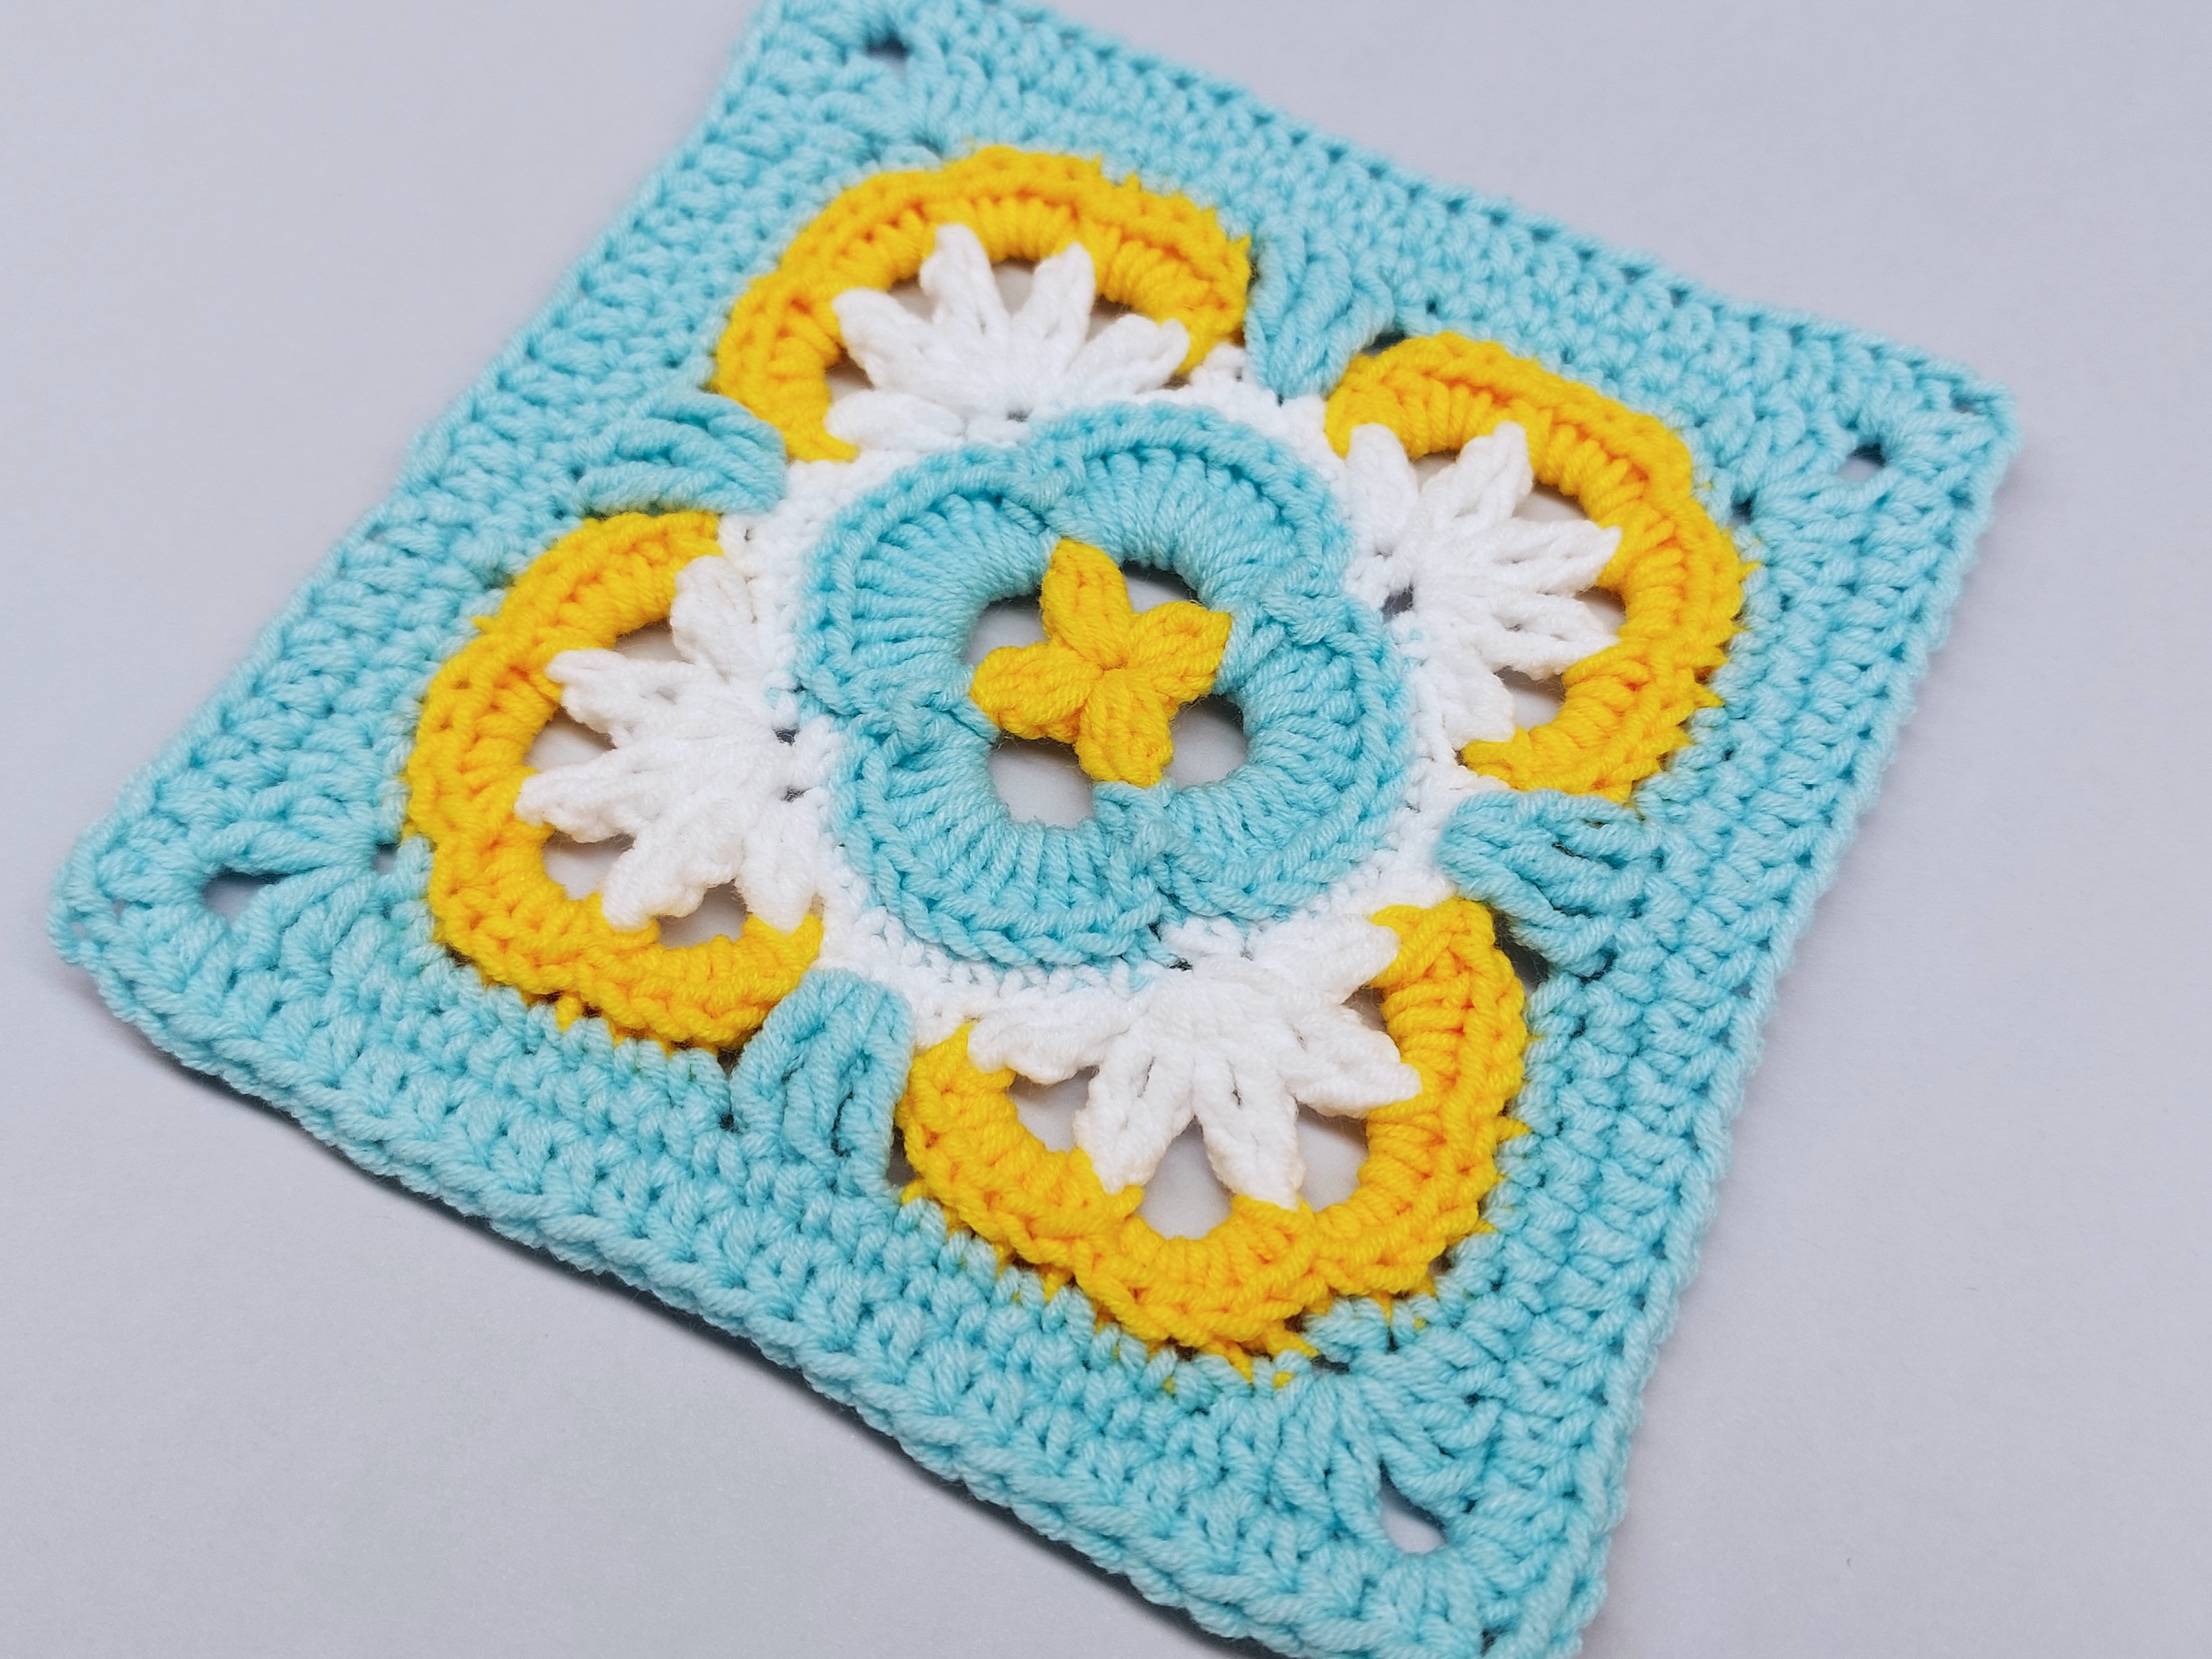 You are currently viewing Crochet granny square / Crochet Motif #125